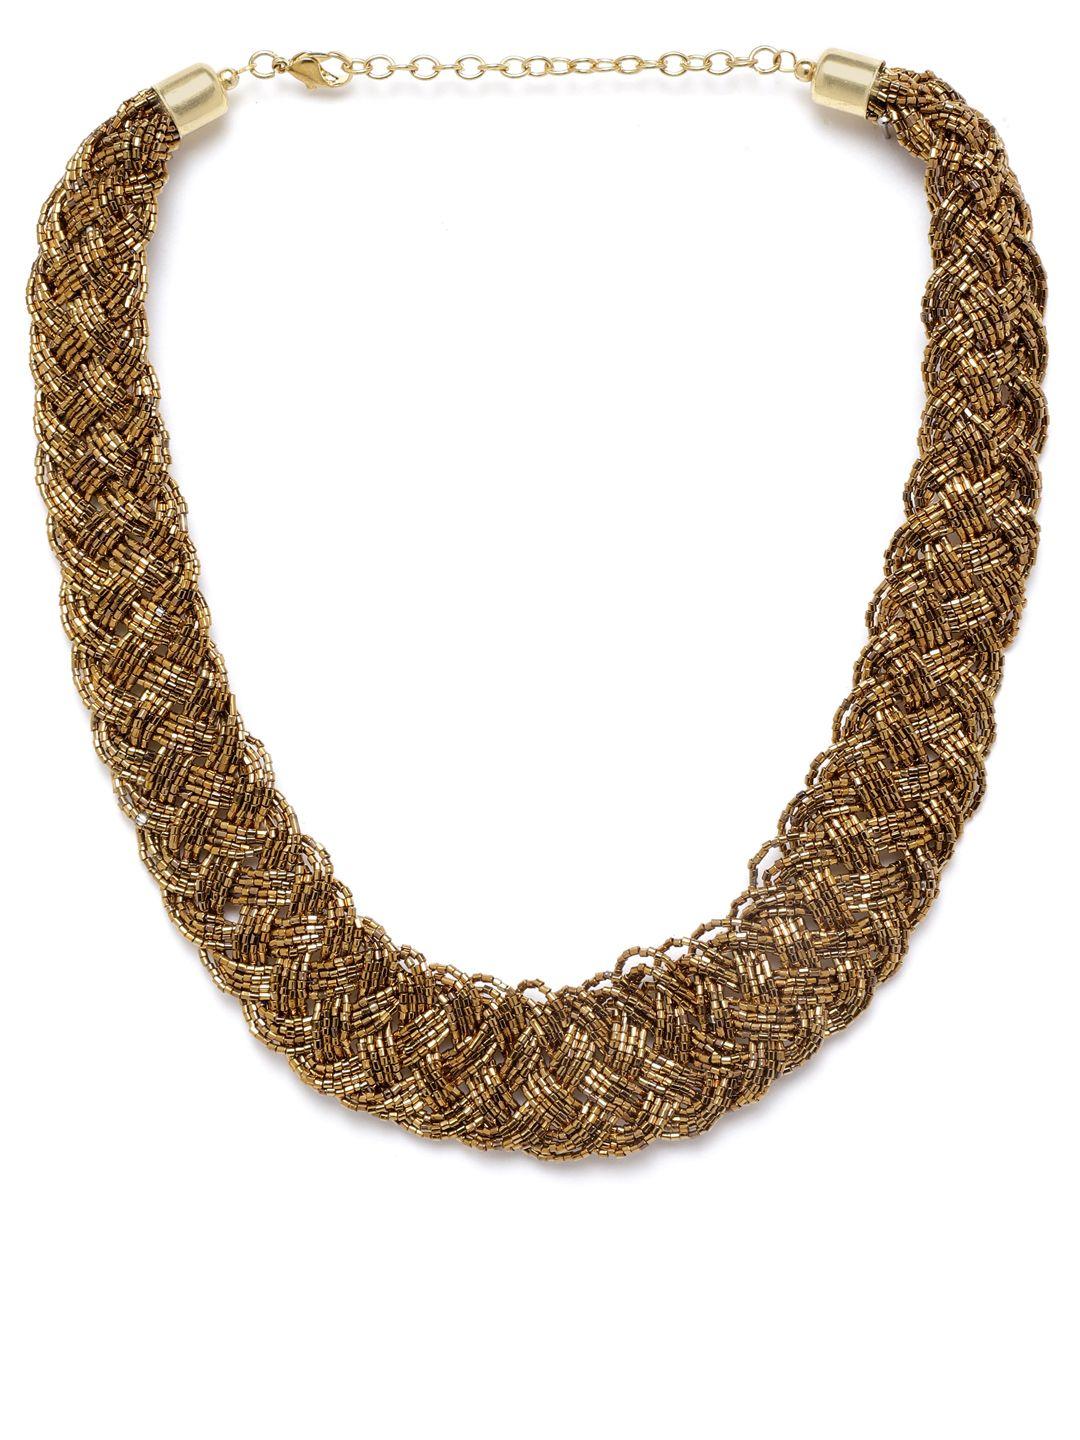 richeera gold-toned beaded braided necklace